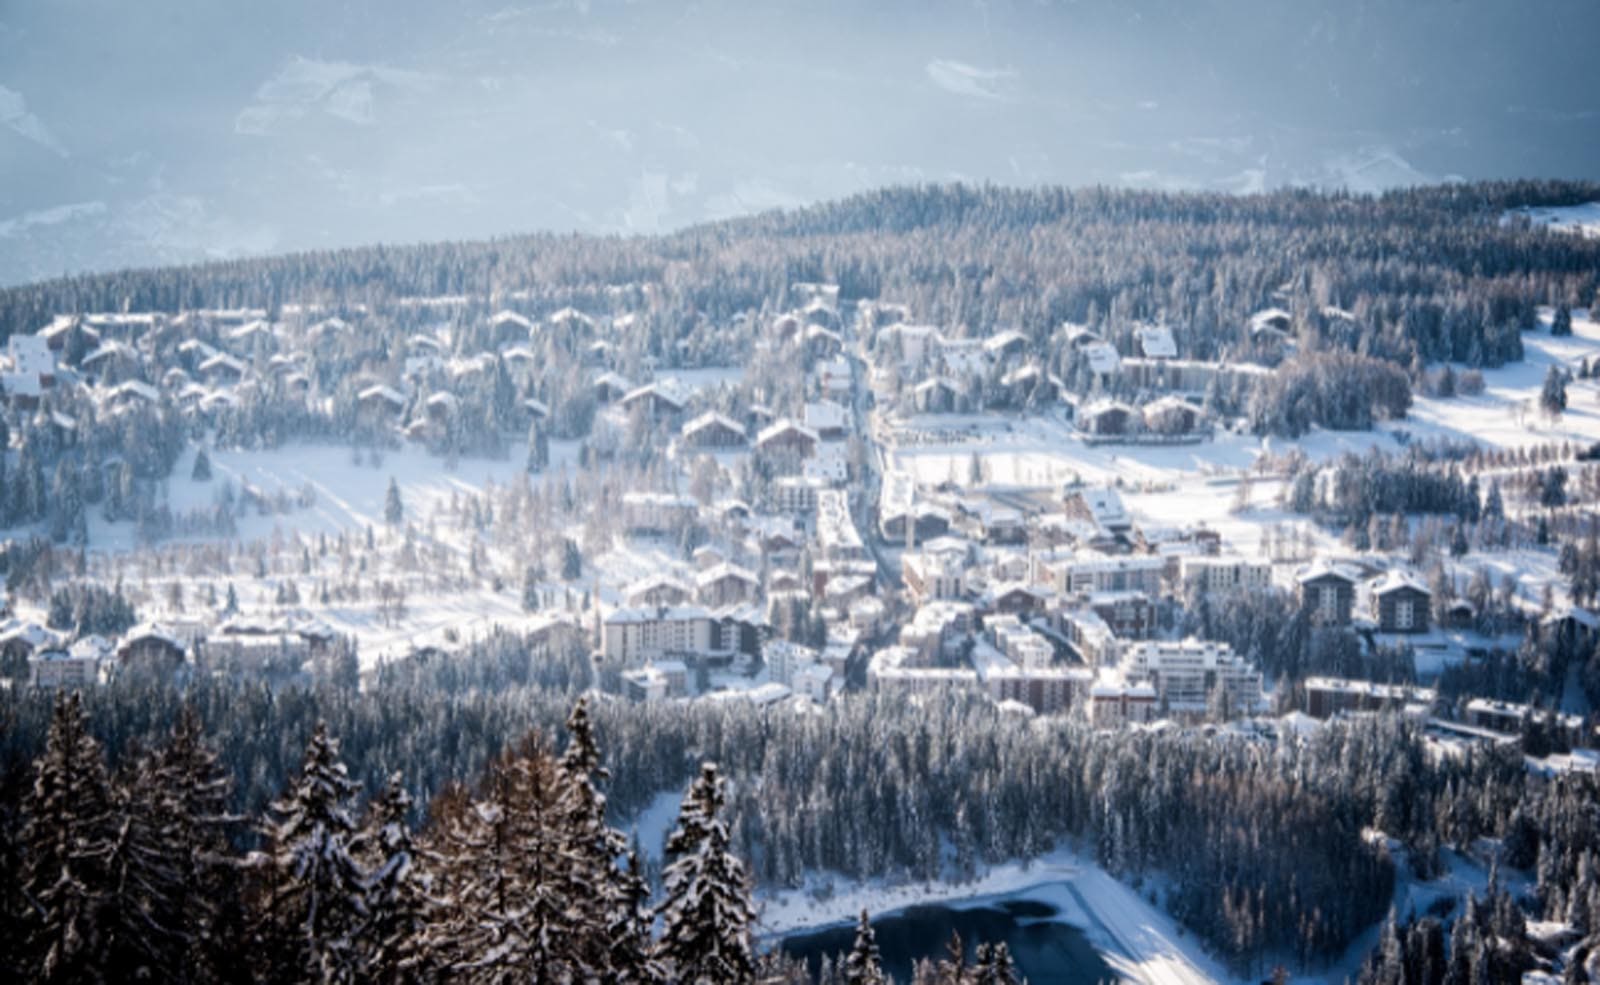 The ski resort of Crans Montana nestled amongst the snowy trees in the Swiss mountains